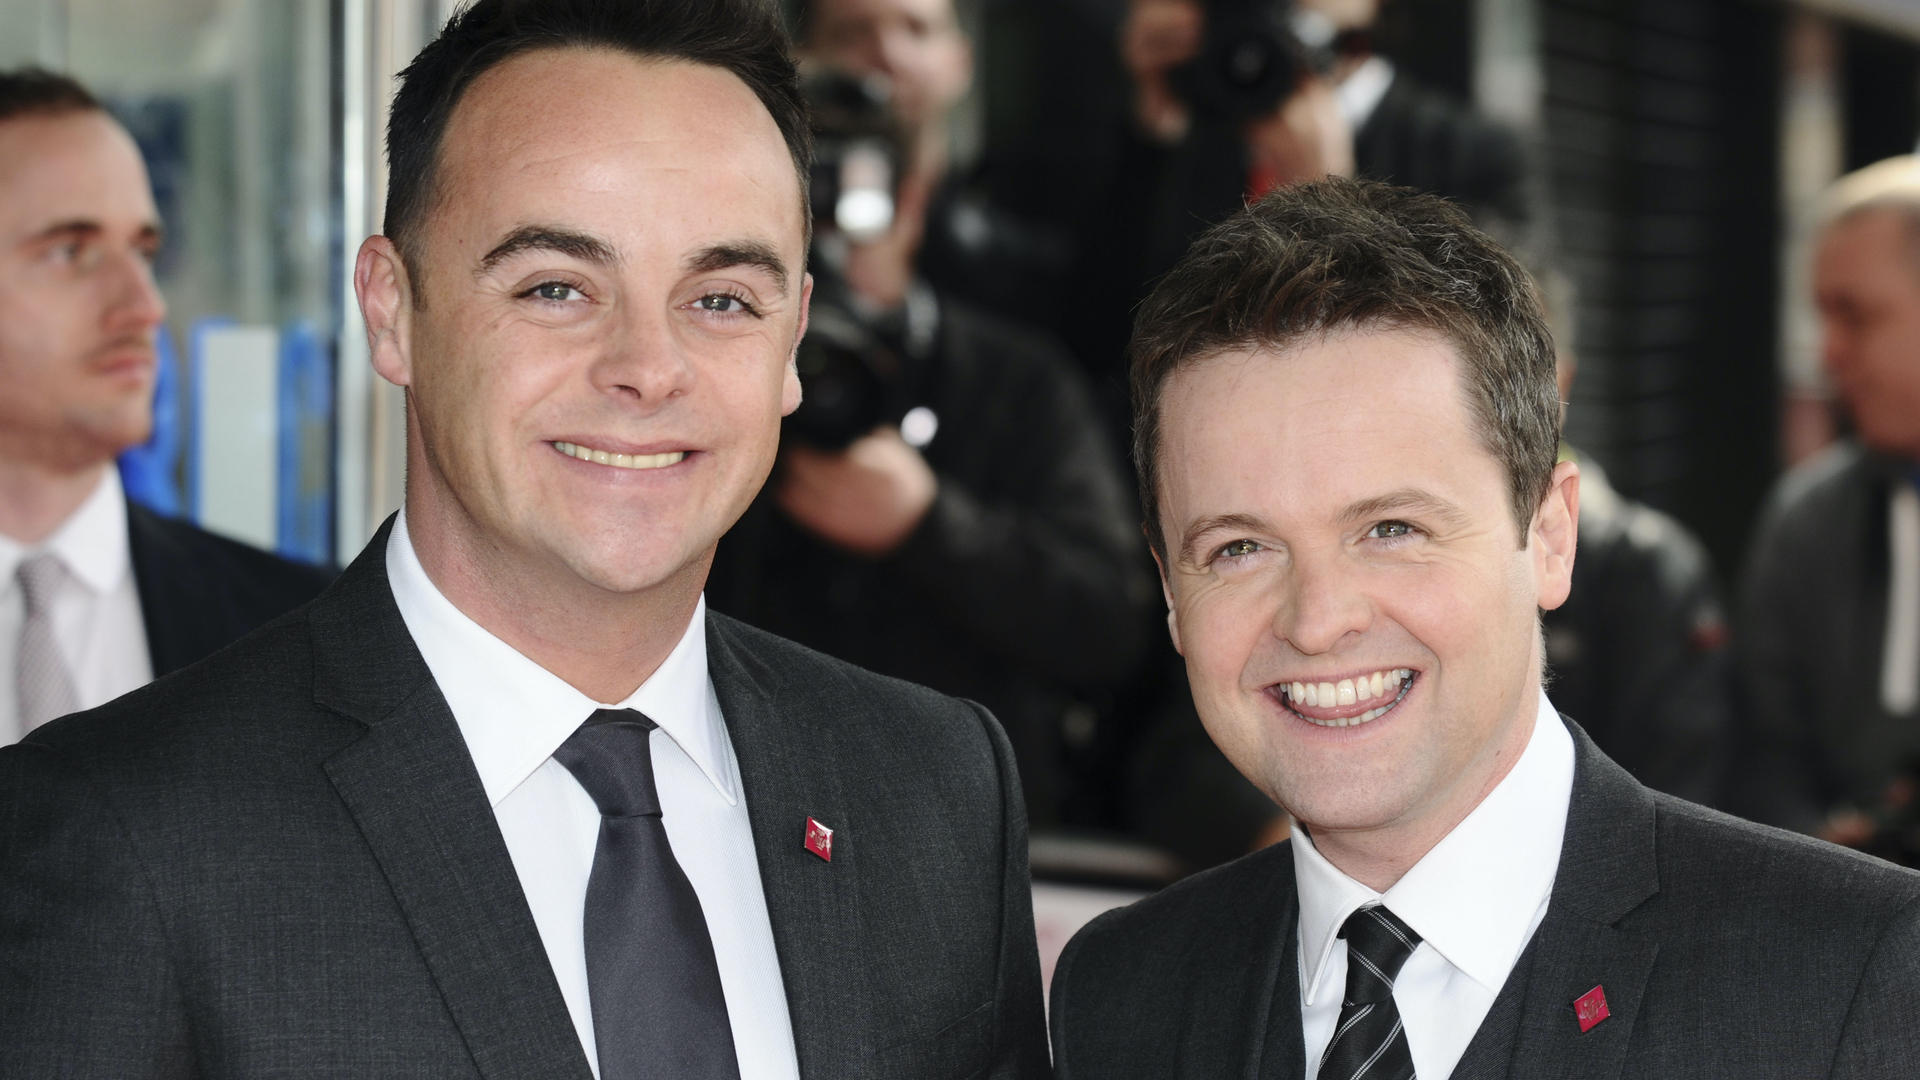 Ant and Dec to host Street Car Showdown